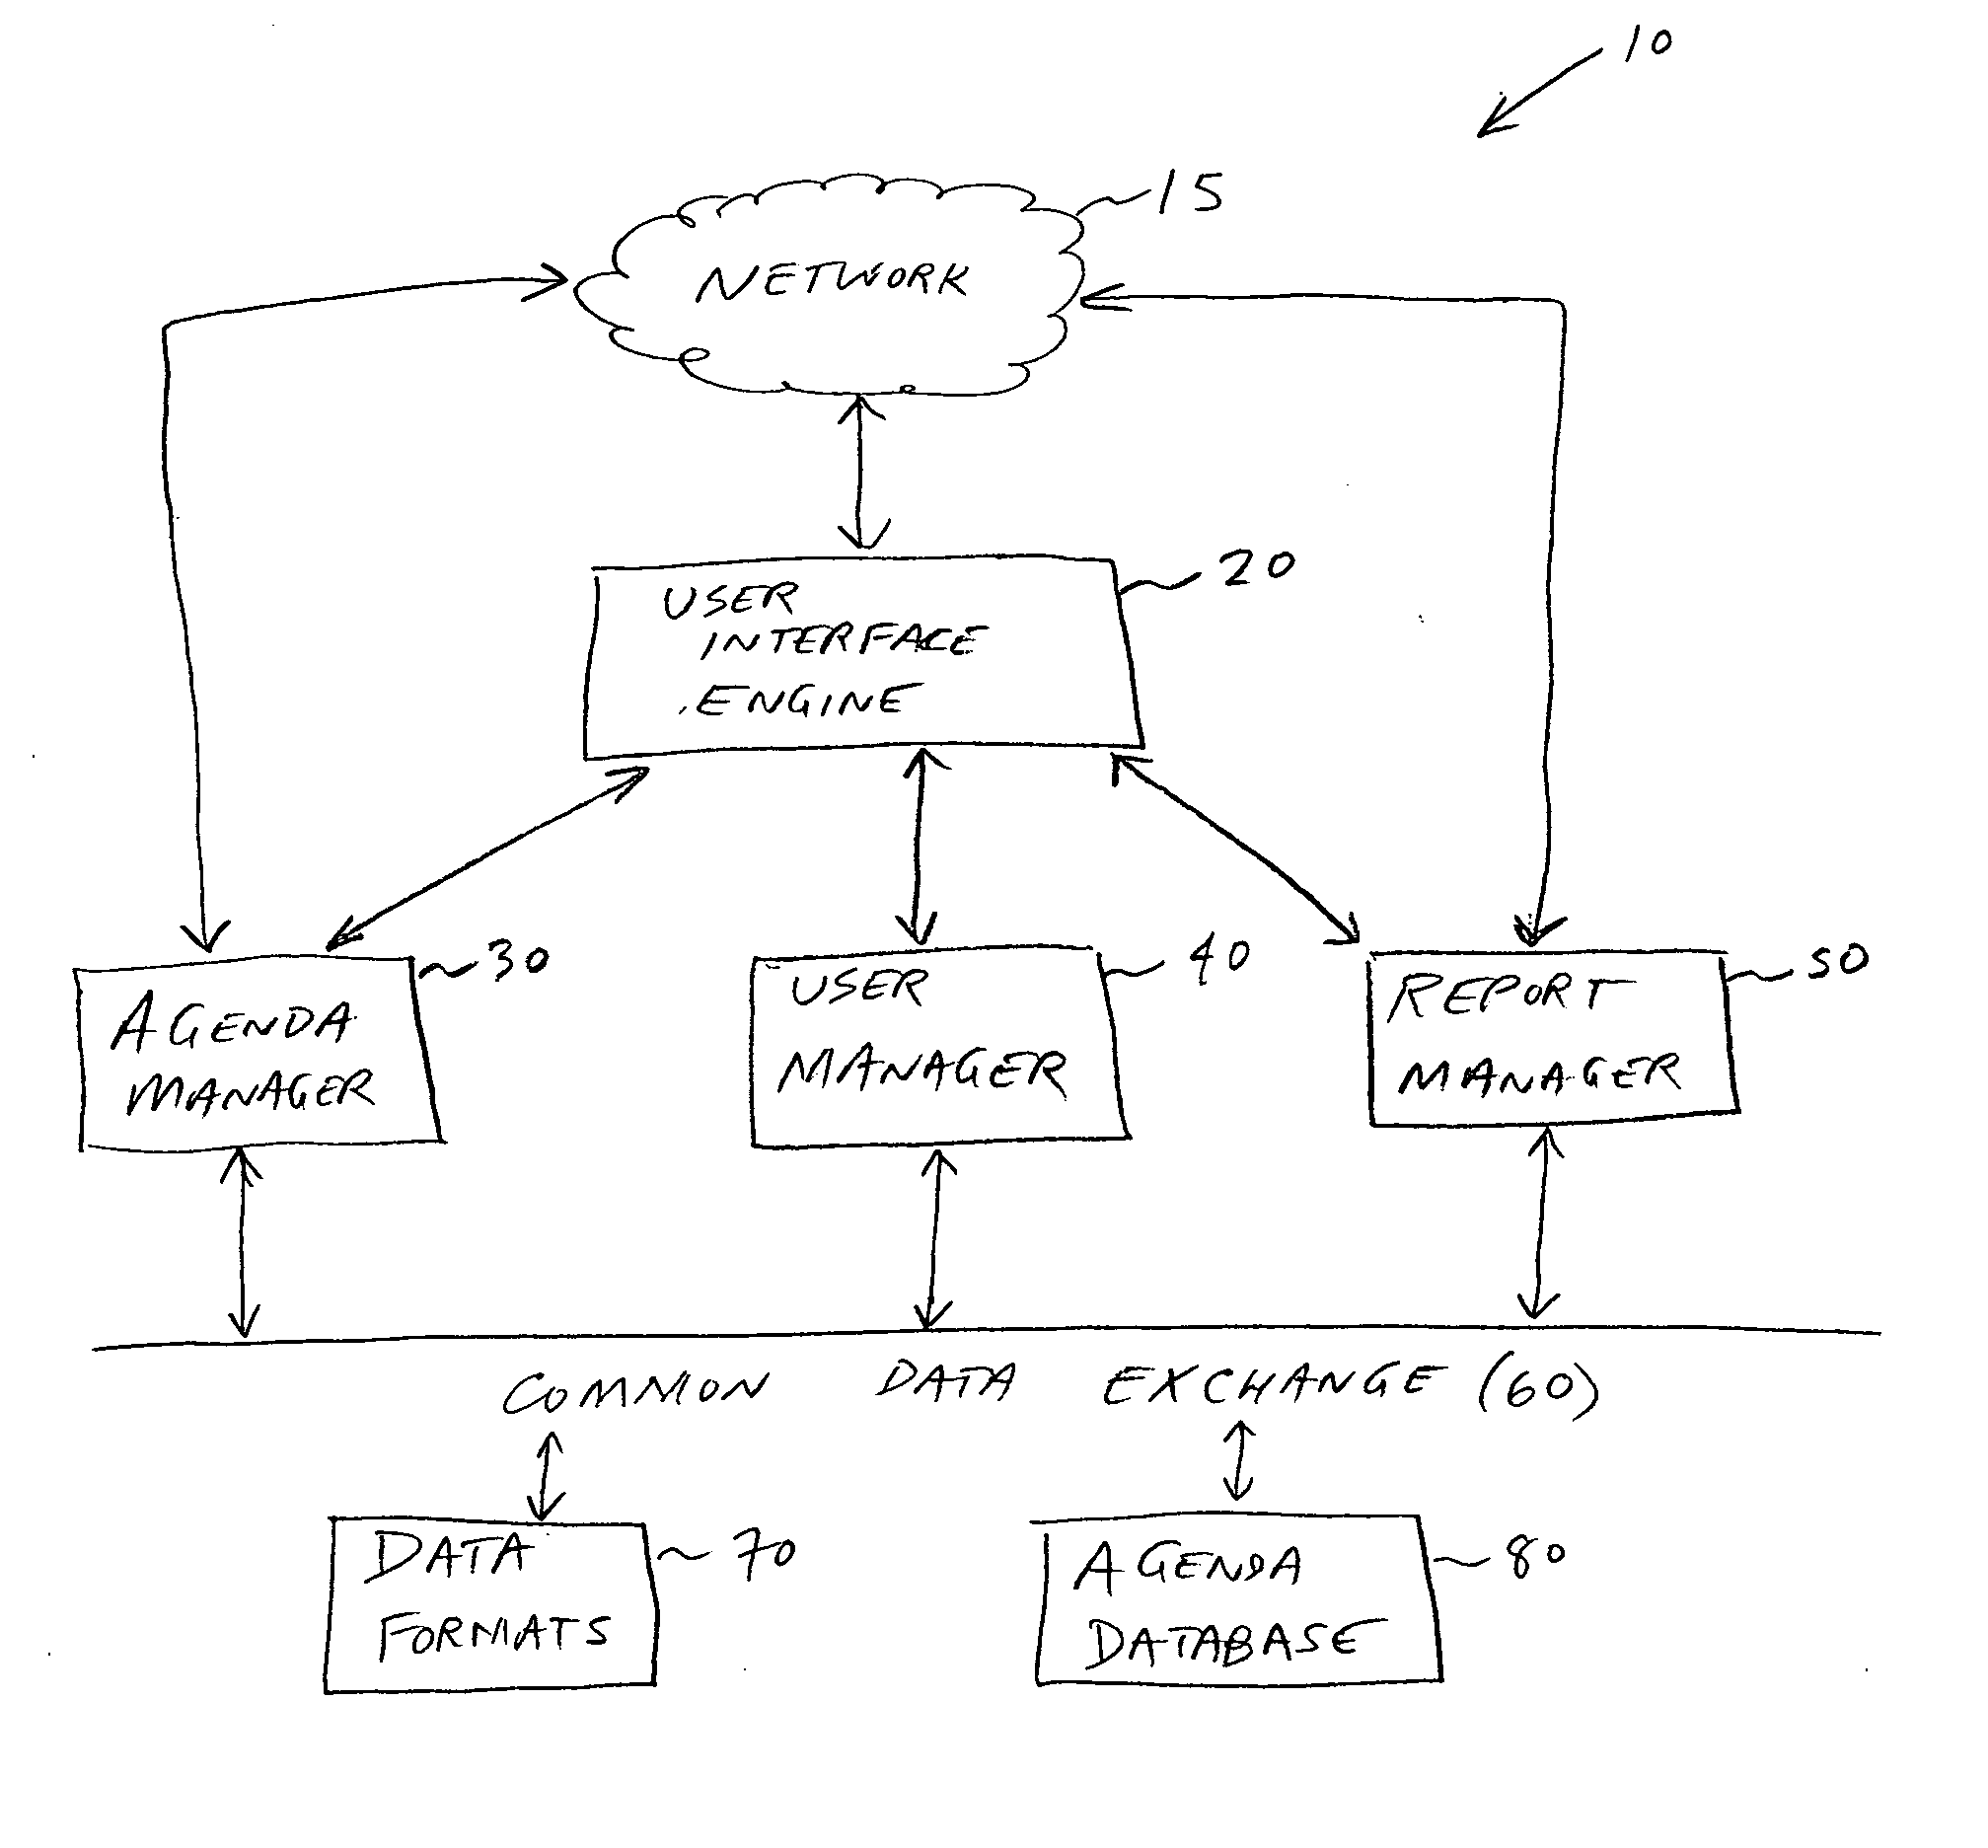 System and method for overcoming decision making and communications errors to produce expedited and accurate group choices